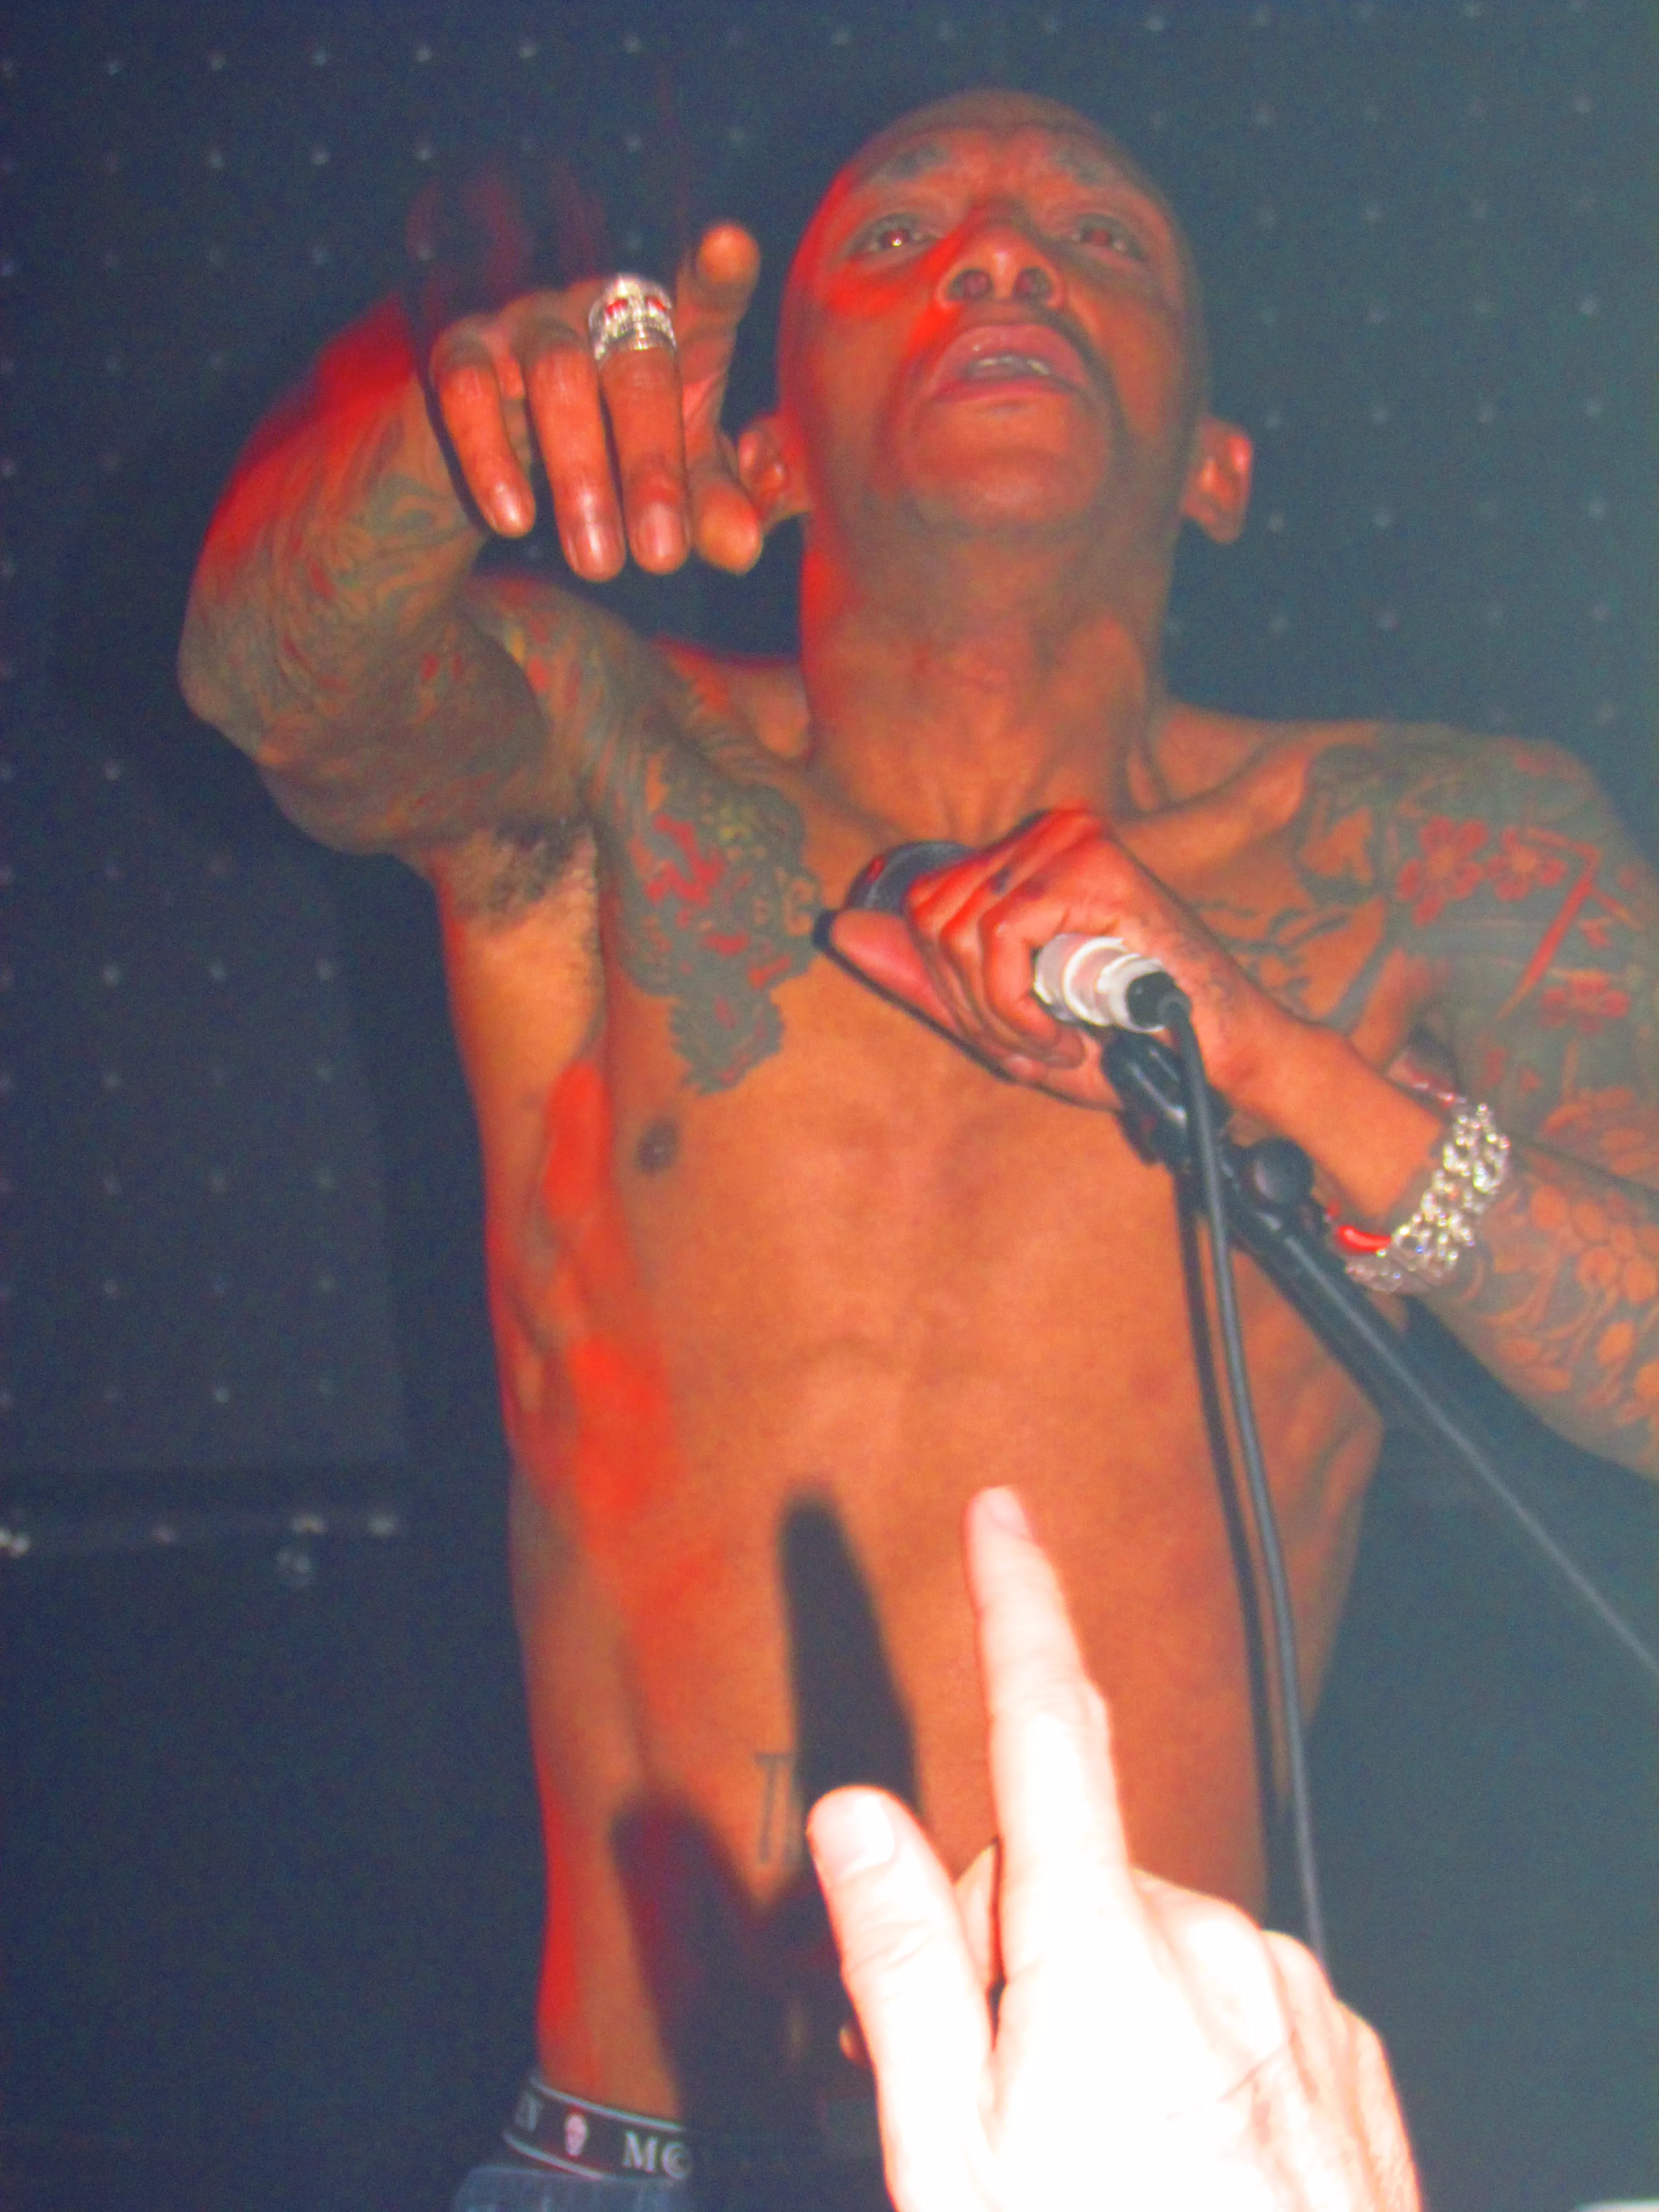 Tricky: The Venue, Vancouver, Canada